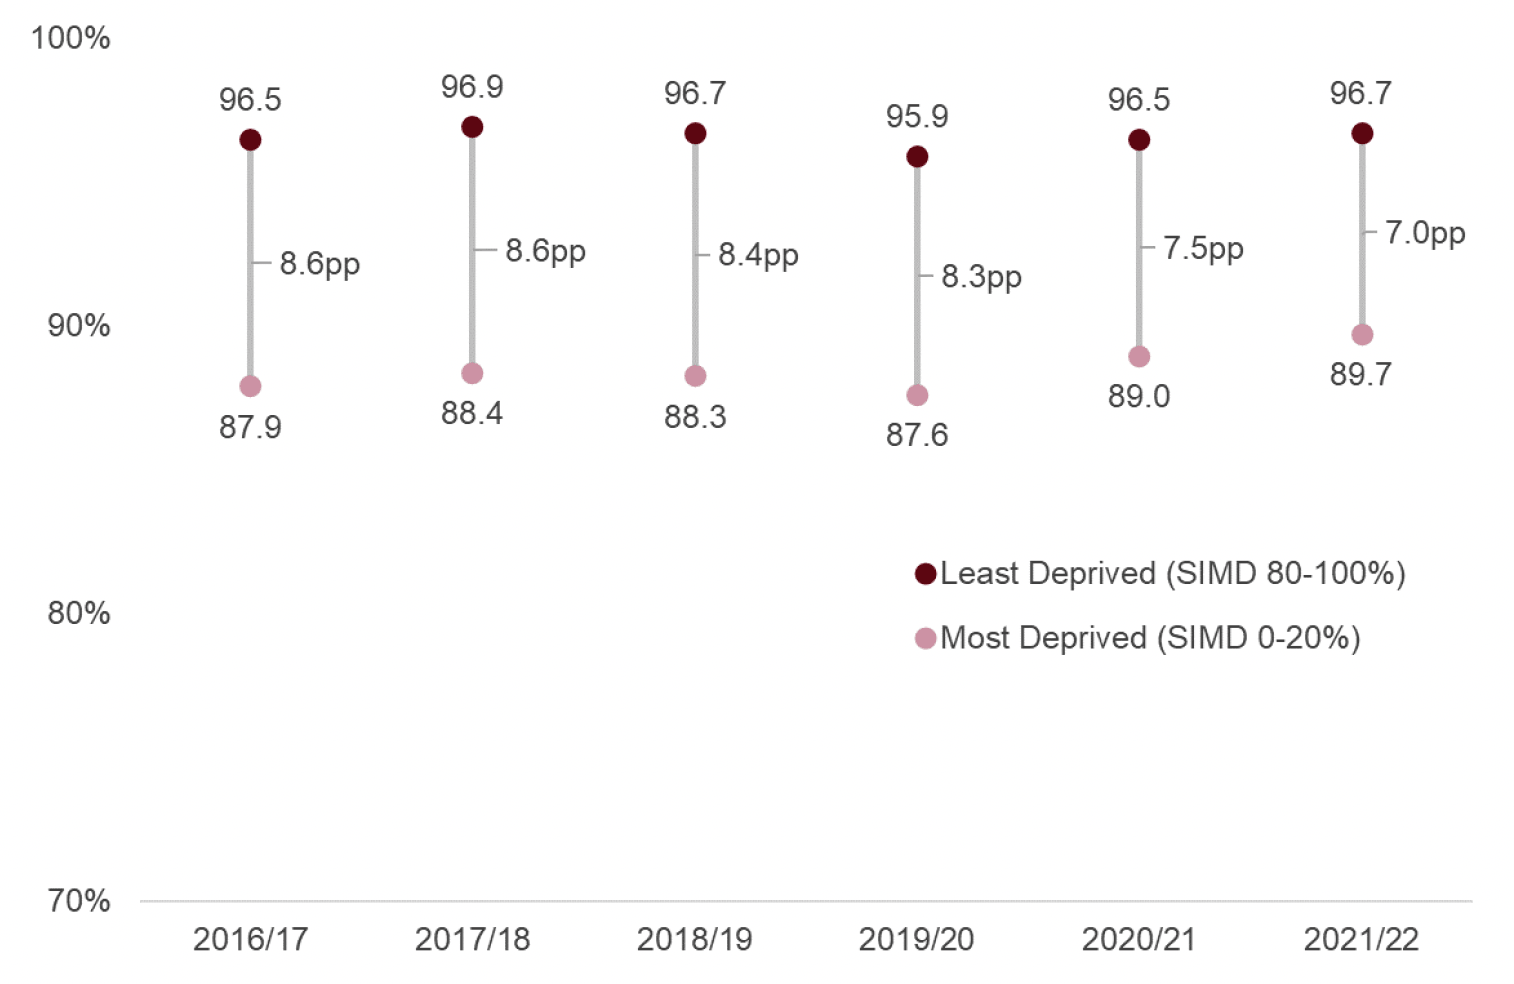 In 2021/22, 96.7% of leavers from the 20% least deprived areas were in a positive follow-up destination, compared with 89.7% of leavers from the 20% most deprived areas. The gap between the two groups in 2021/22 was therefore 7 percentage points. This is a reduction from 2016/17 when the gap between the two groups was 8.6 percentage points. 